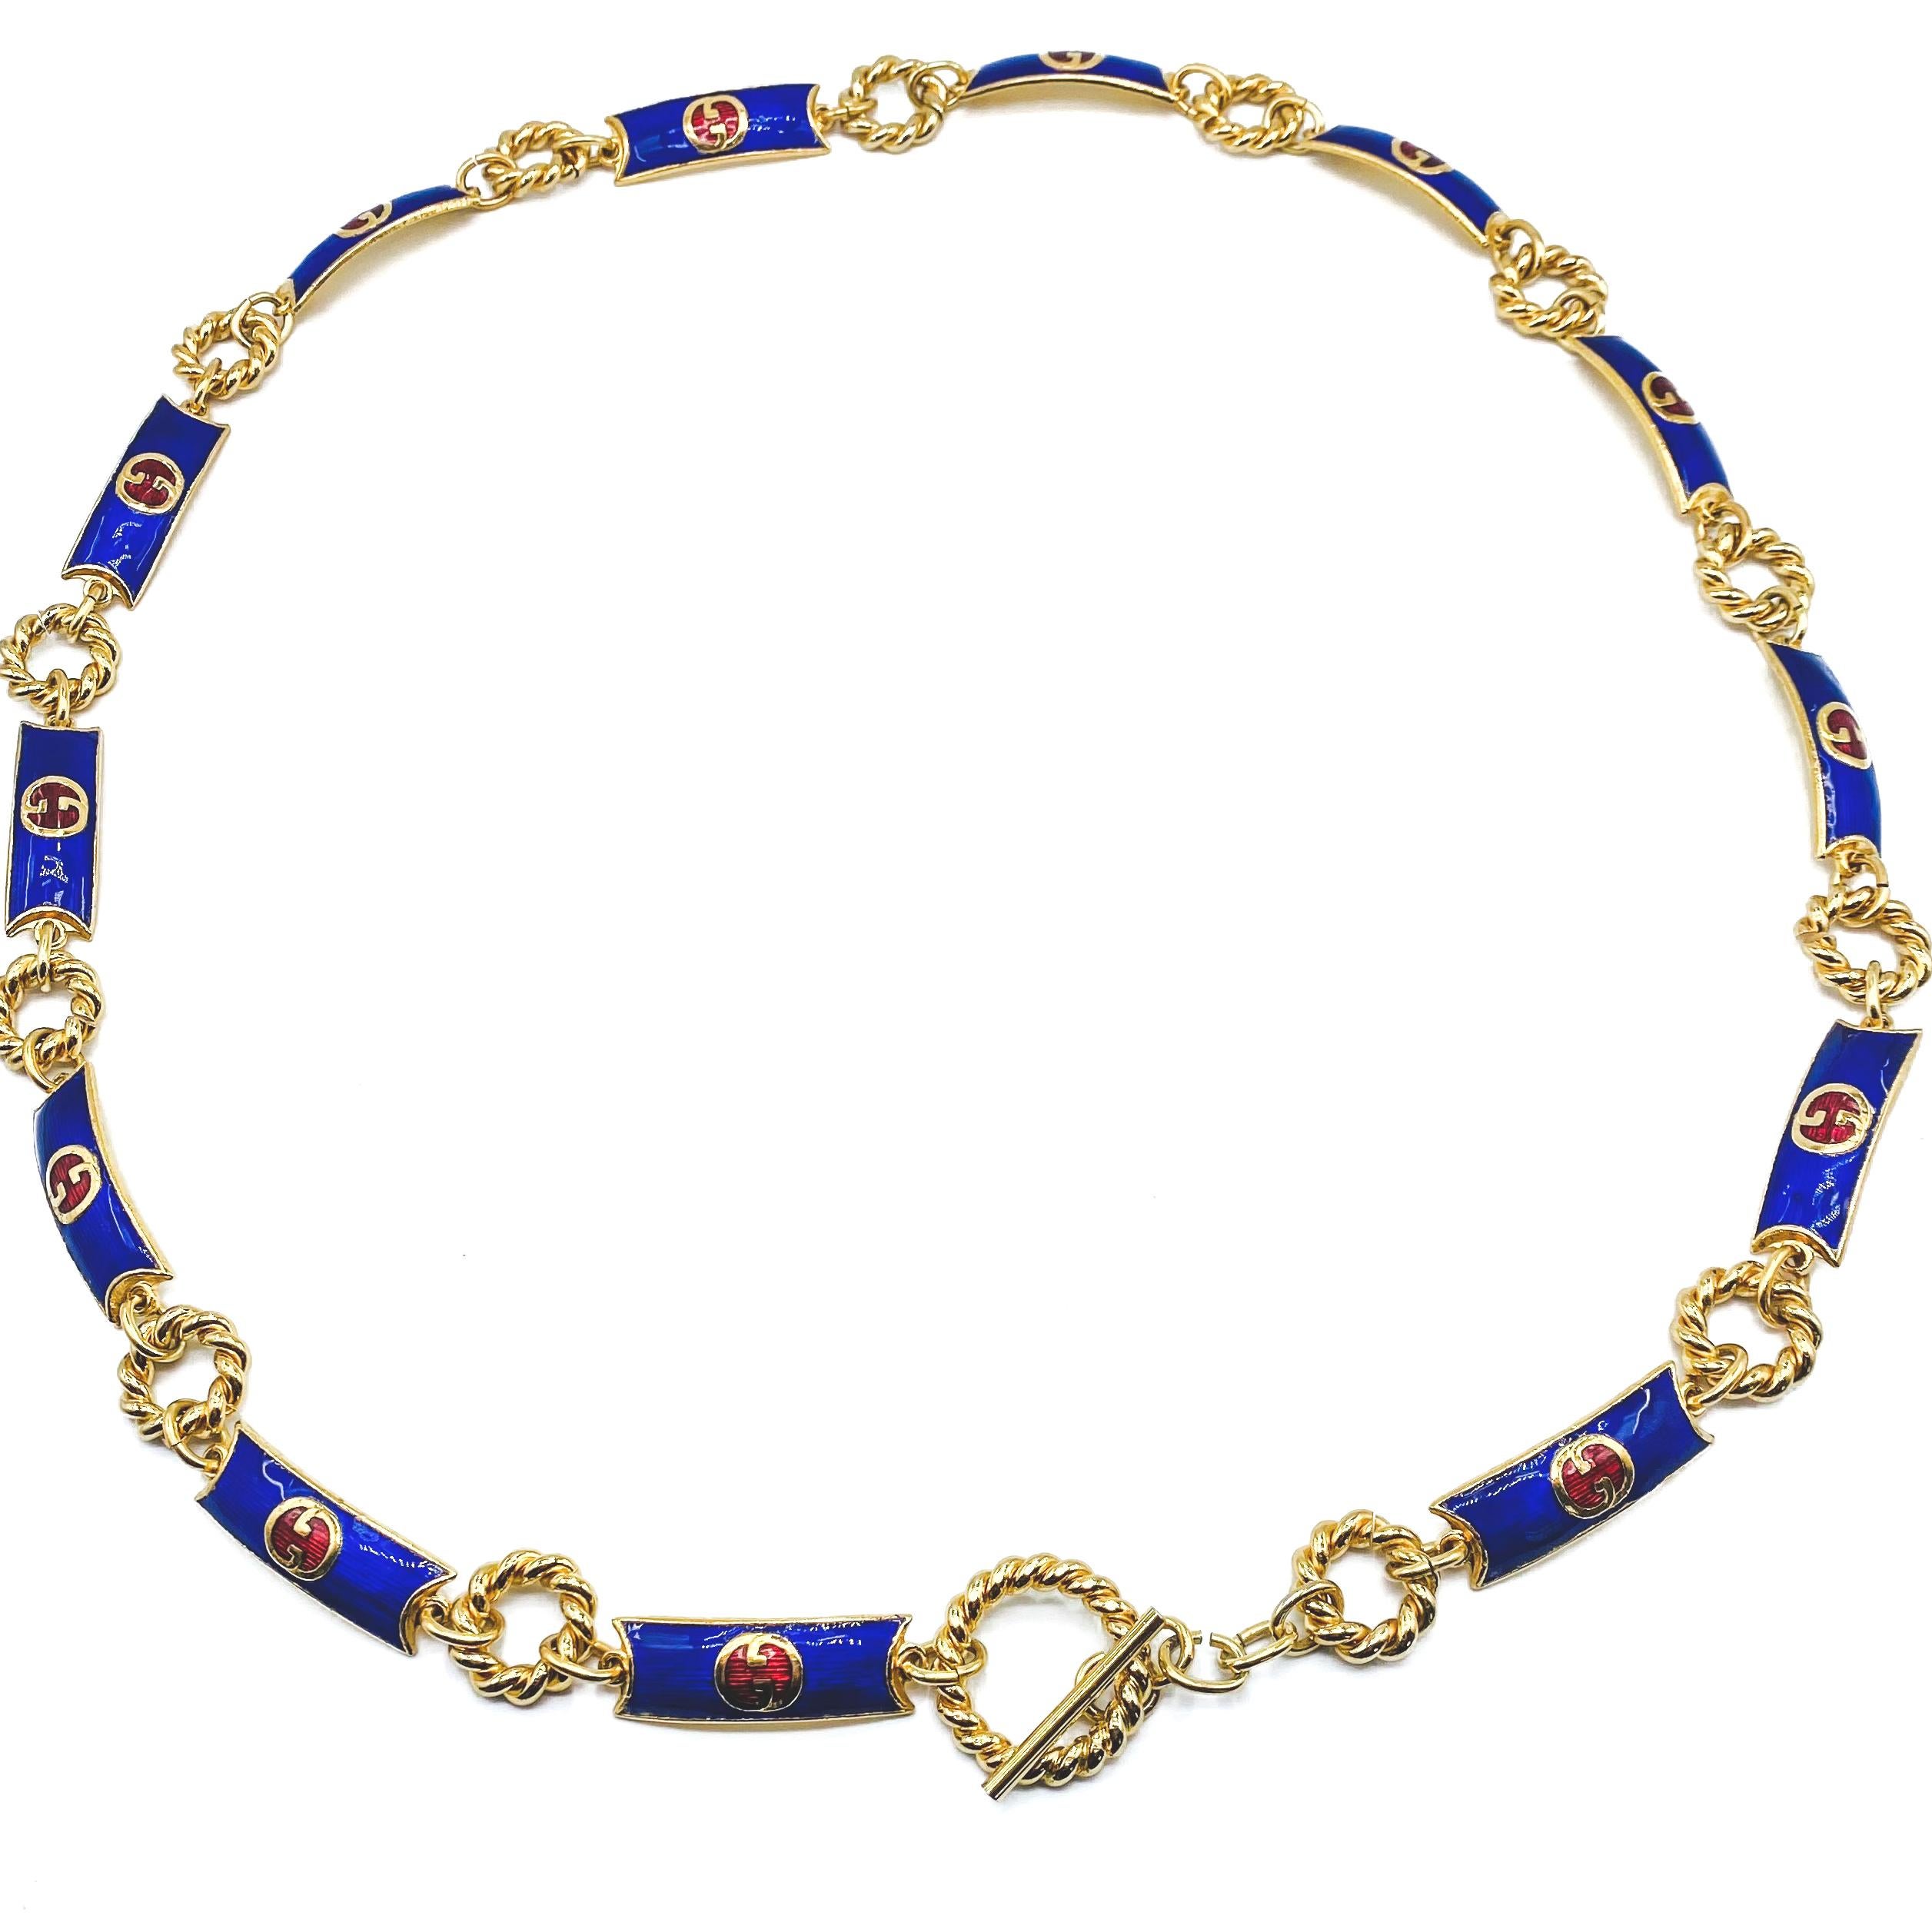 Gucci Vintage 1970s Belt

Incredible enamel belt from the 1970s Gucci archive

Detail
-Made in Italy in the 1970s
-Crafted from gold plated metal 
-Each link features the double G Gucci logo inlaid into a vivid blue and red enamel
-Can also be worn